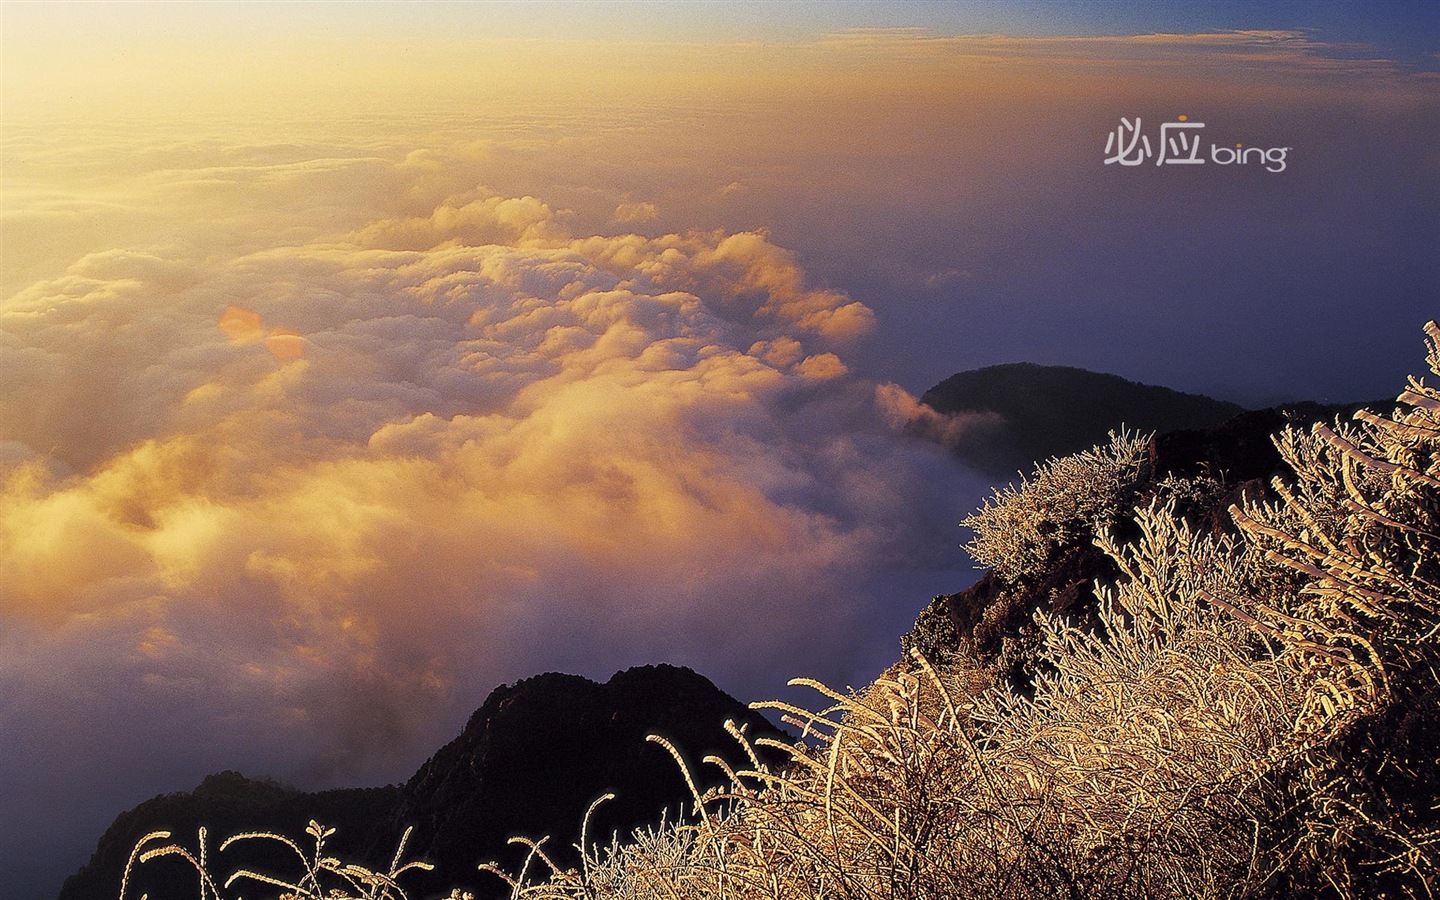 Bing selection best HD wallpapers: China theme wallpaper (2) #14 - 1440x900